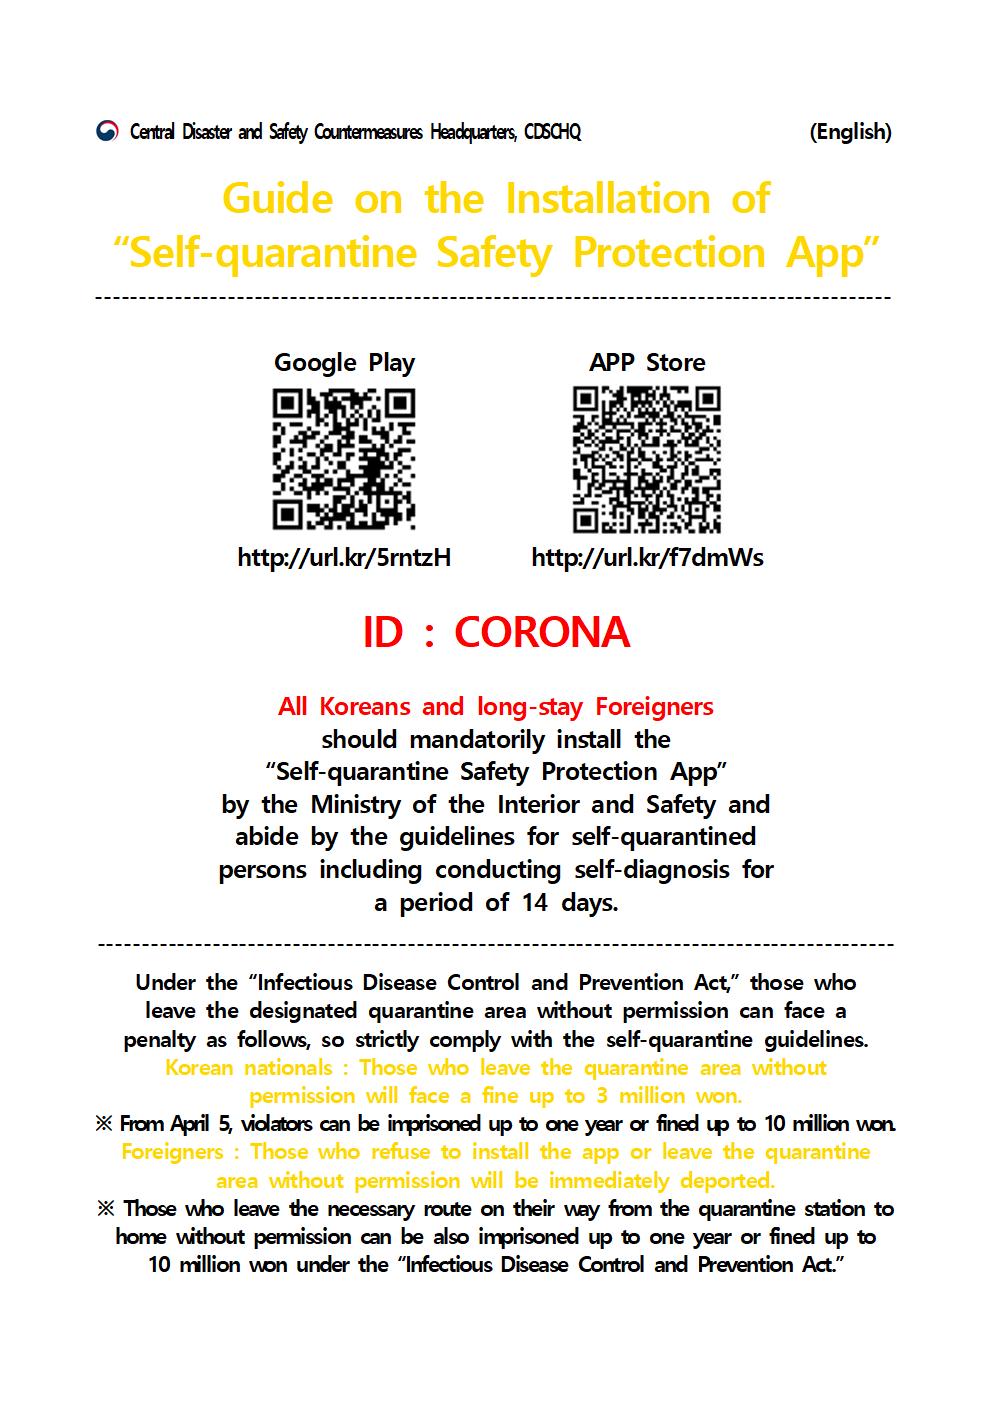 Guide on the installation of self-quarantine safety protection app (English) 이미지